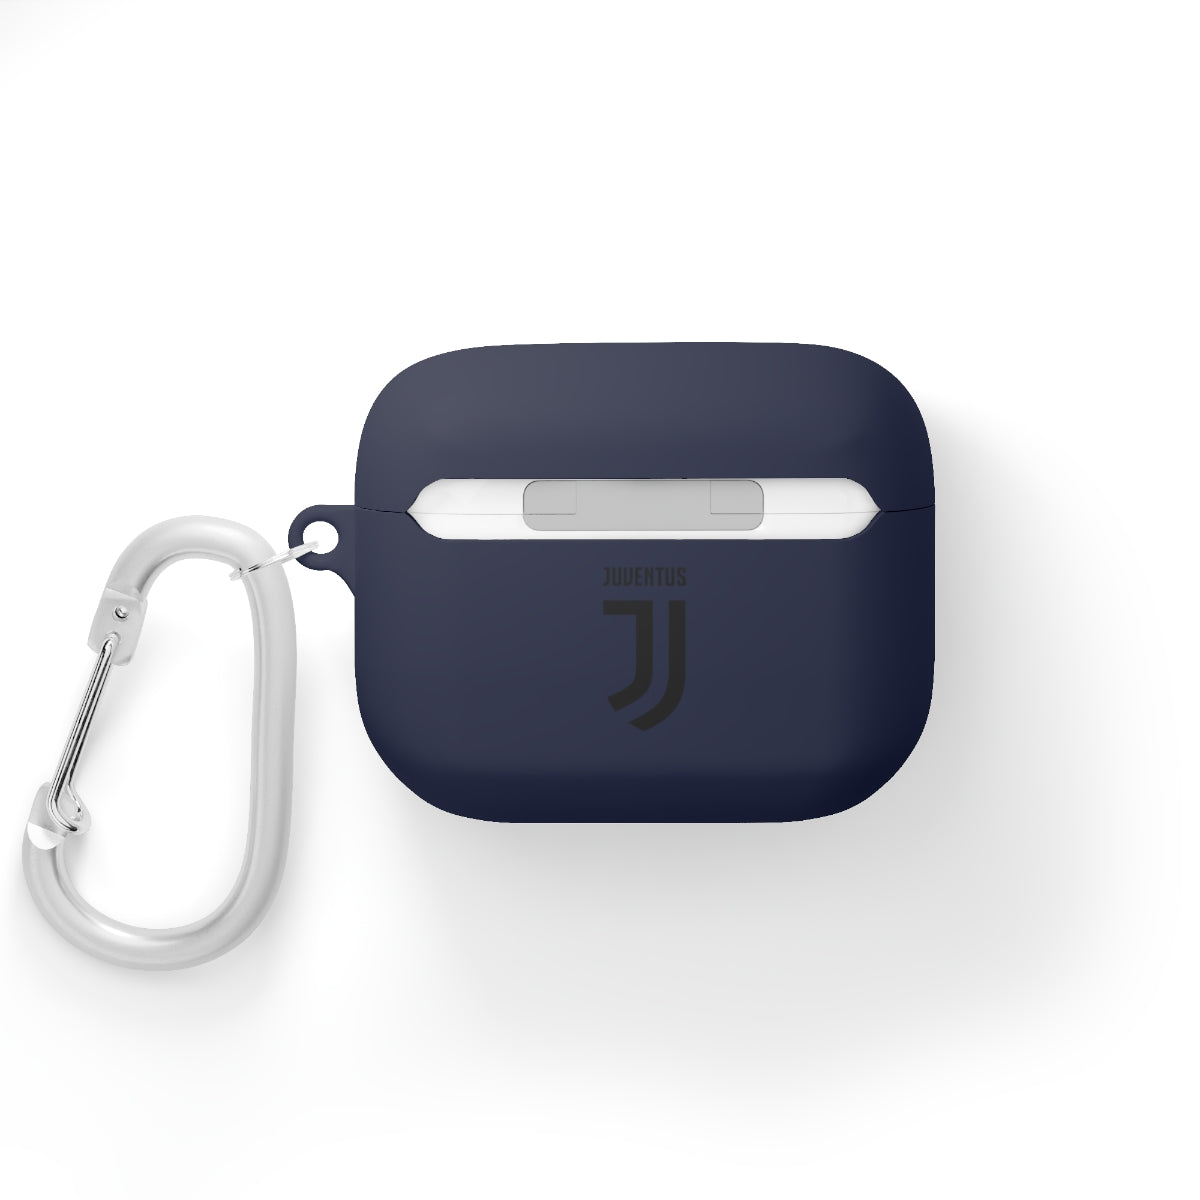 Juventus AirPods and AirPods Pro Case Cover